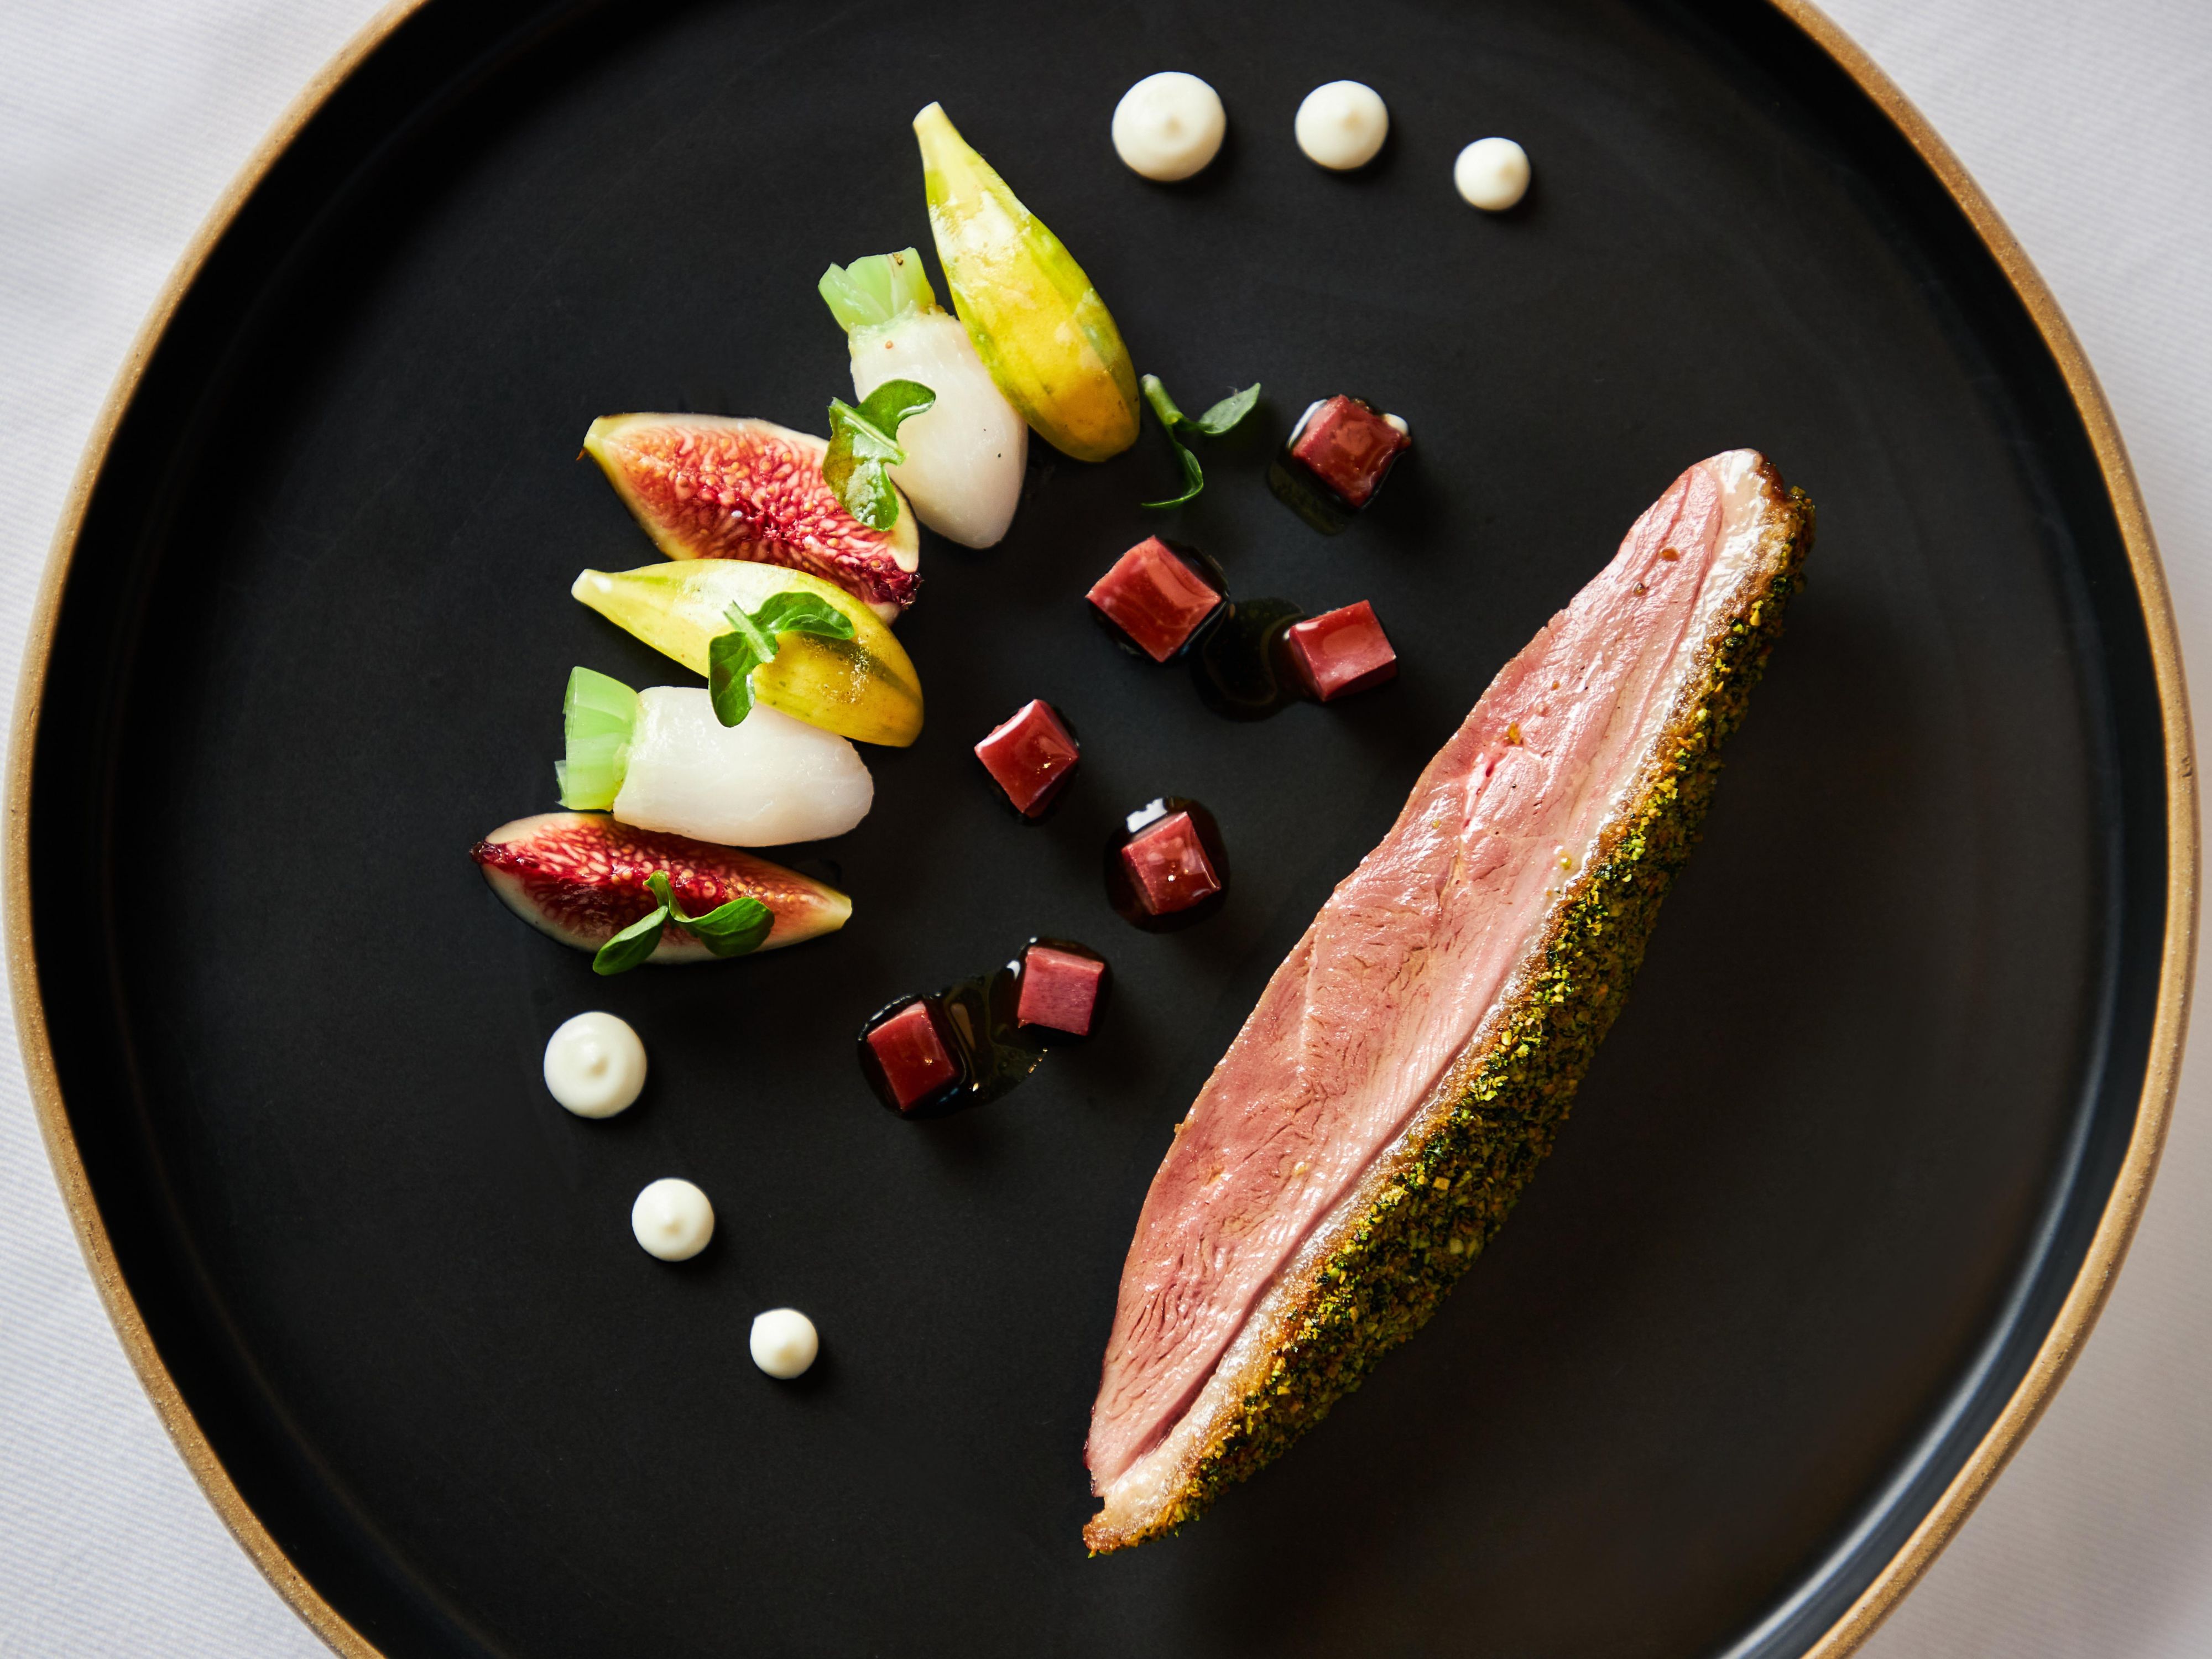 Each Luce dish is prepared with unique local seasonal ingredients.